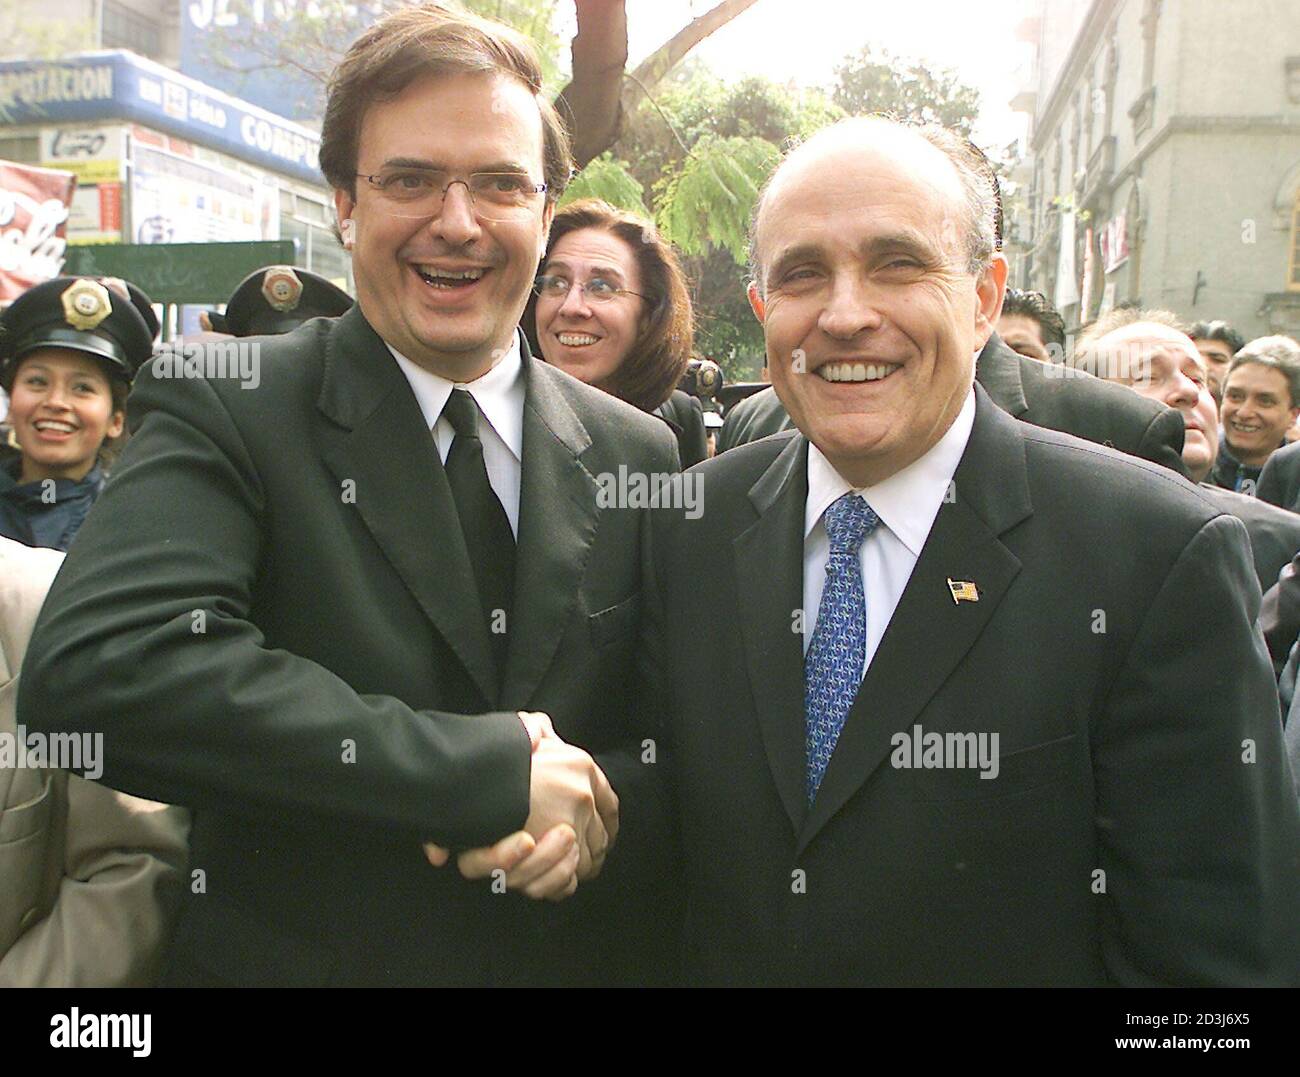 Former New York Mayor Rudy Giuliani (R) shakes hands with Mexico City's police chief Marcelo Ebrad during a tour along a street in a popular Mexico City district on January 14, 2003. Famed for taming the wild streets of New York in the 1990s with his 'zero tolerance' crime policy, Giuliani has been hired for $4.3 million by a group of prominent Mexican businessmen to reduce Mexico City's dizzying crime rate. REUTERS/Daniel Aguilar  DA Stock Photo